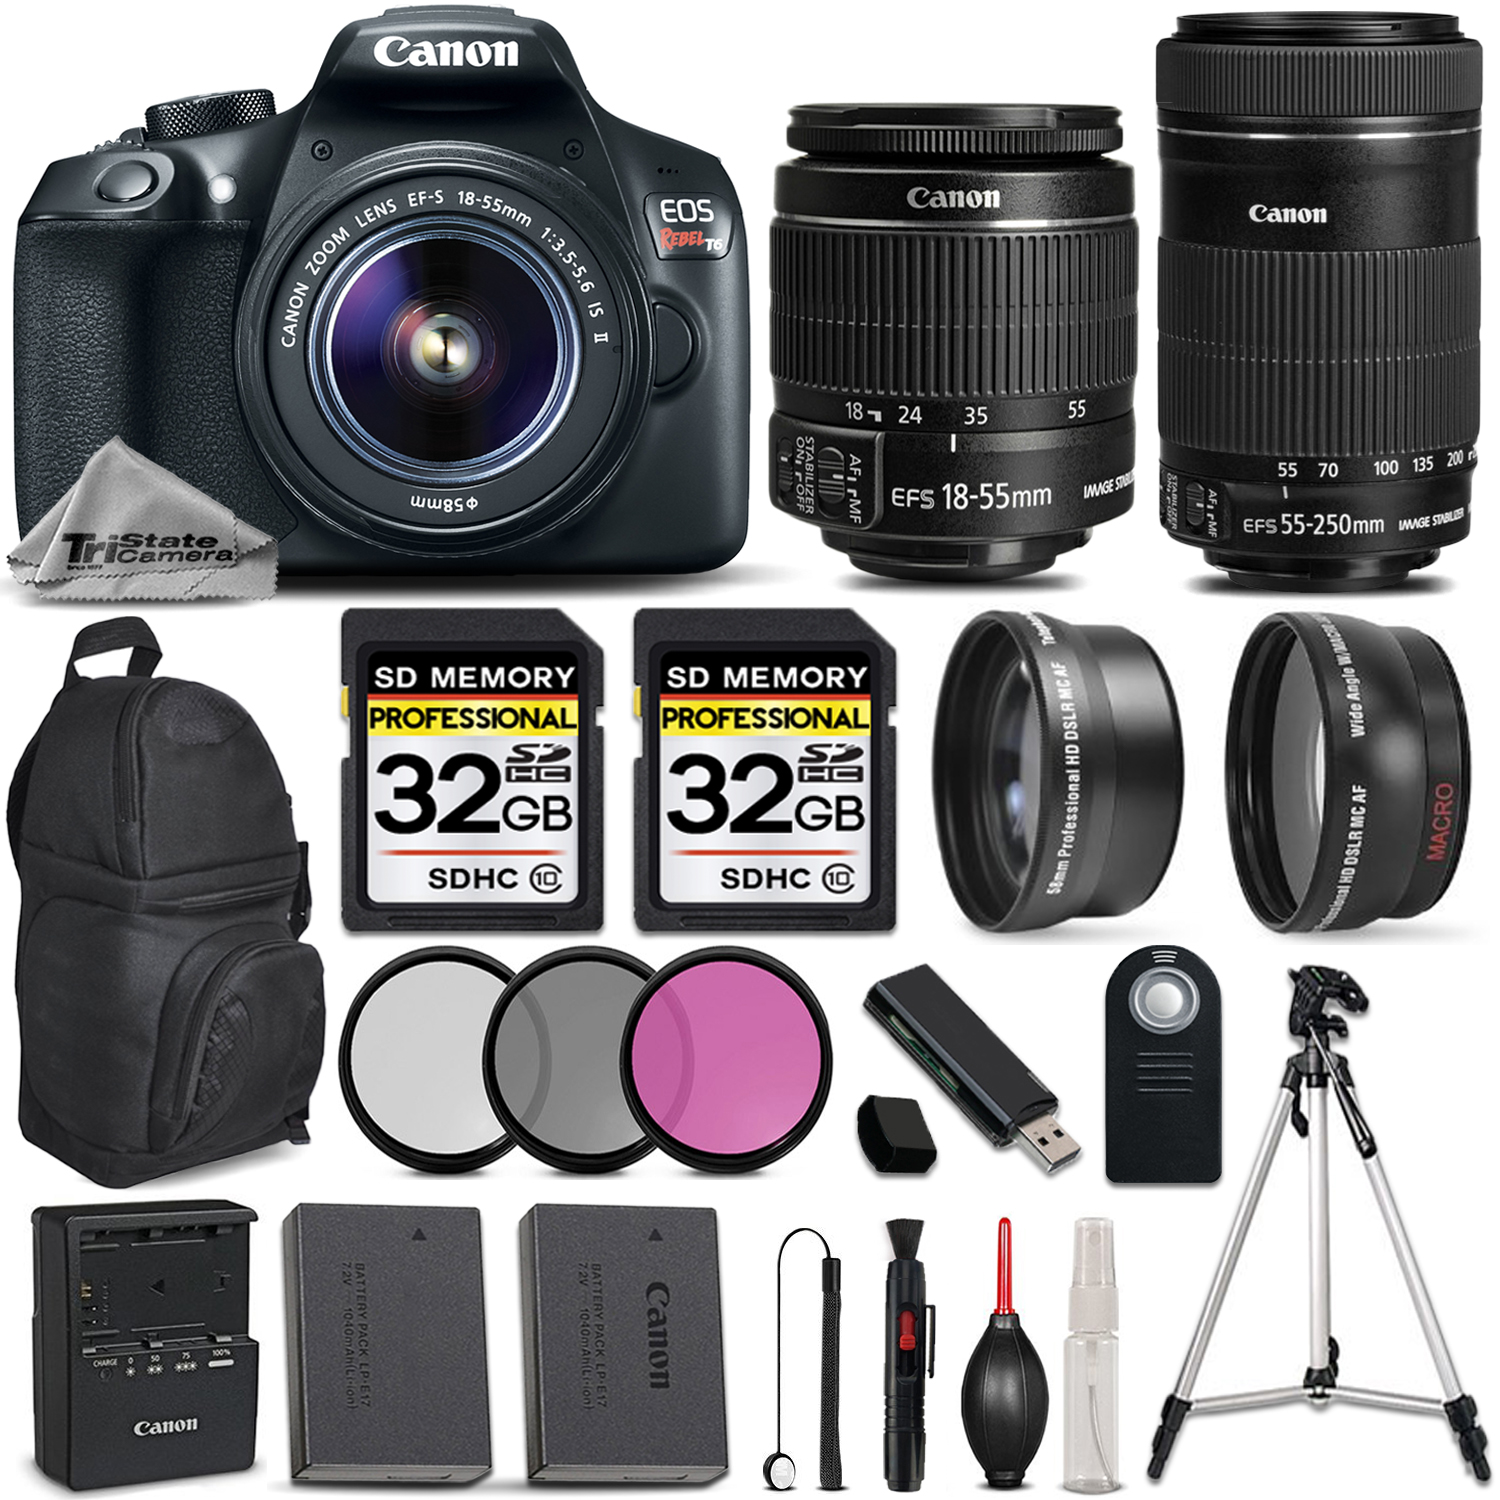 EOS REBEL T6 DSLR Camera + 18-55mm IS Lens +Canon 55-250 IS STM - PRO KIT *FREE SHIPPING*